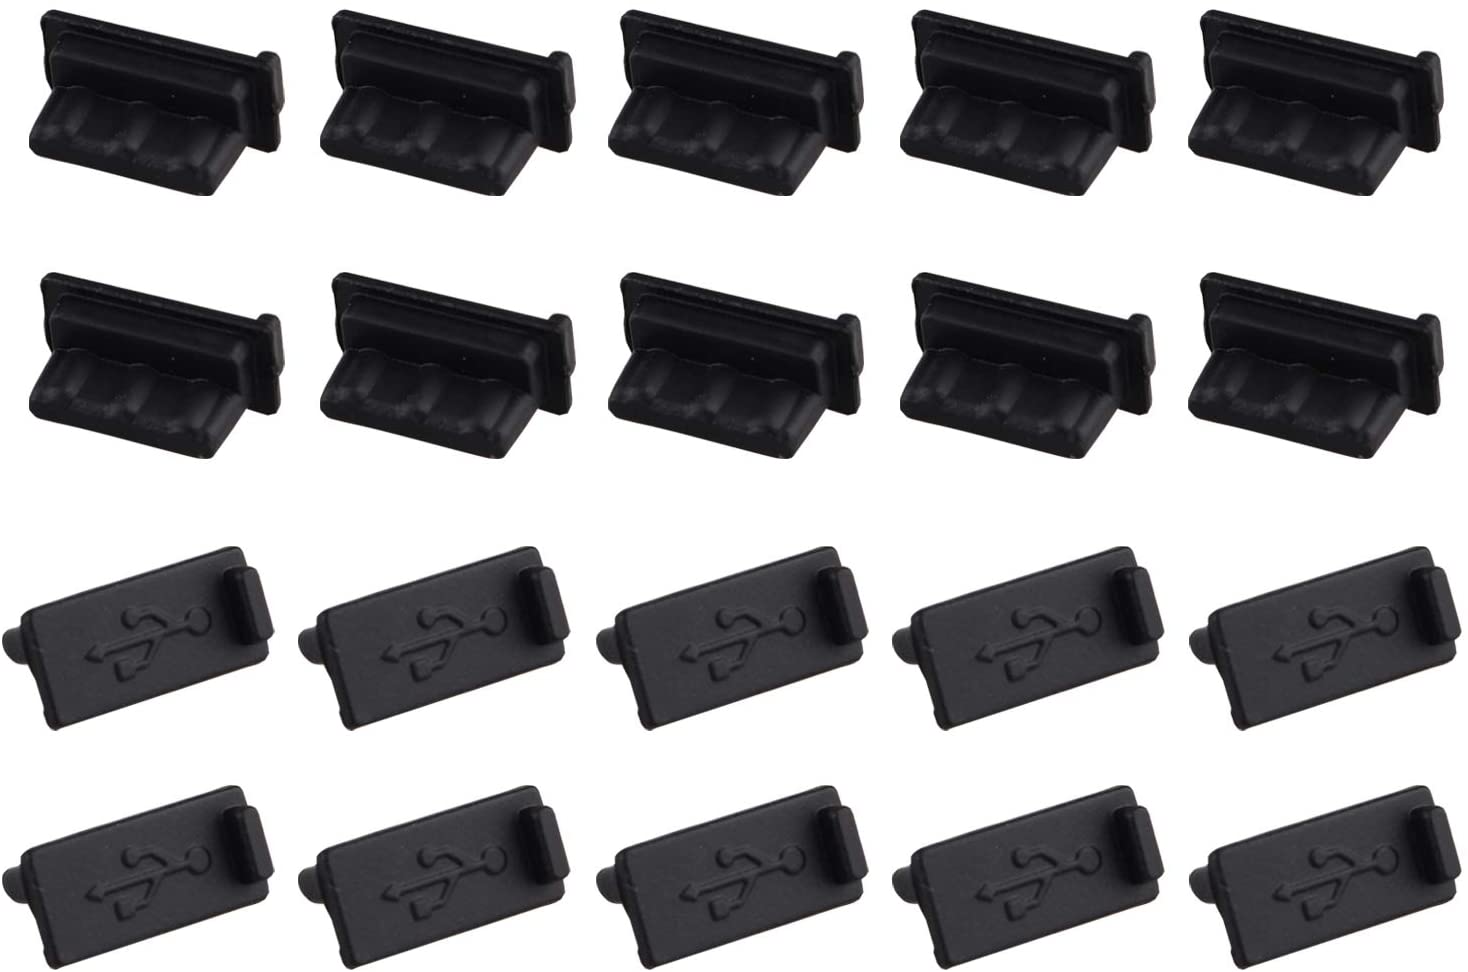 Futheda 16PCS Universal Silicone HDMI Female Port Interface Plug Anti Dust Cover Cap Protector Compatible with Laptop Computer Tablet Desktop TV Black